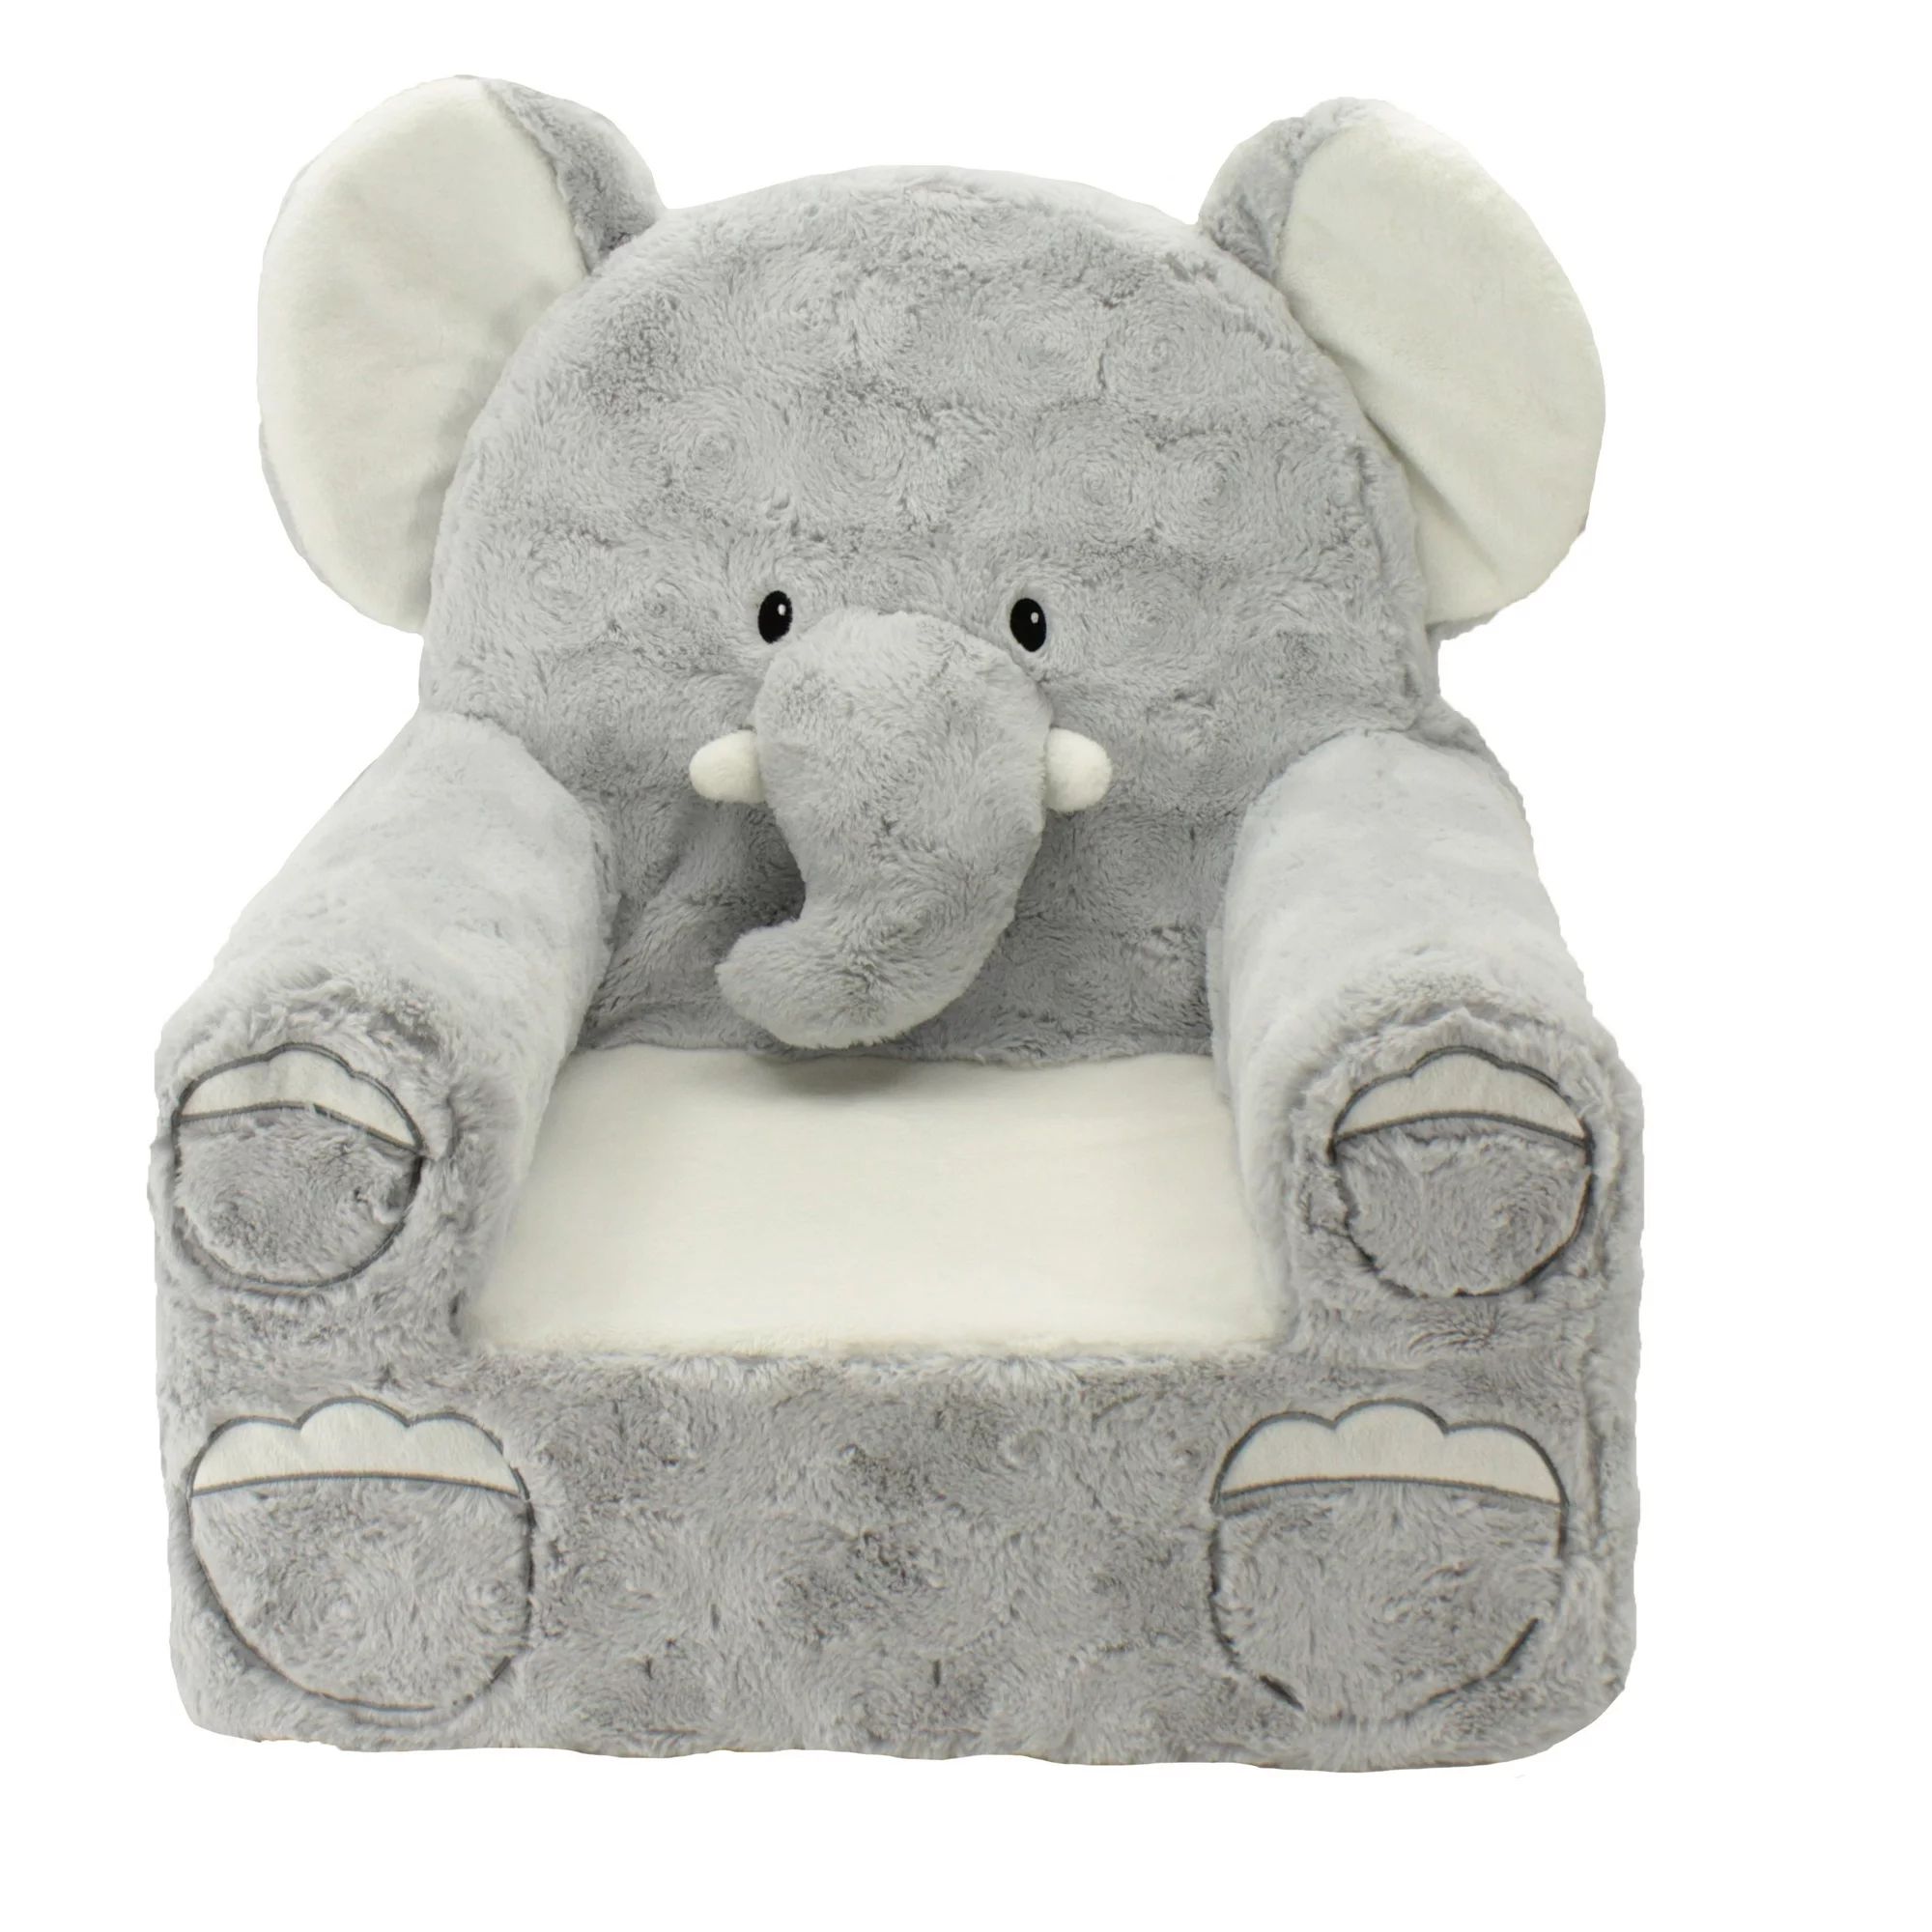 Sweet Seats Adorable Elephant Children's Chair, Standard Size, Machine Washable Removable Cover, ... | Walmart (US)